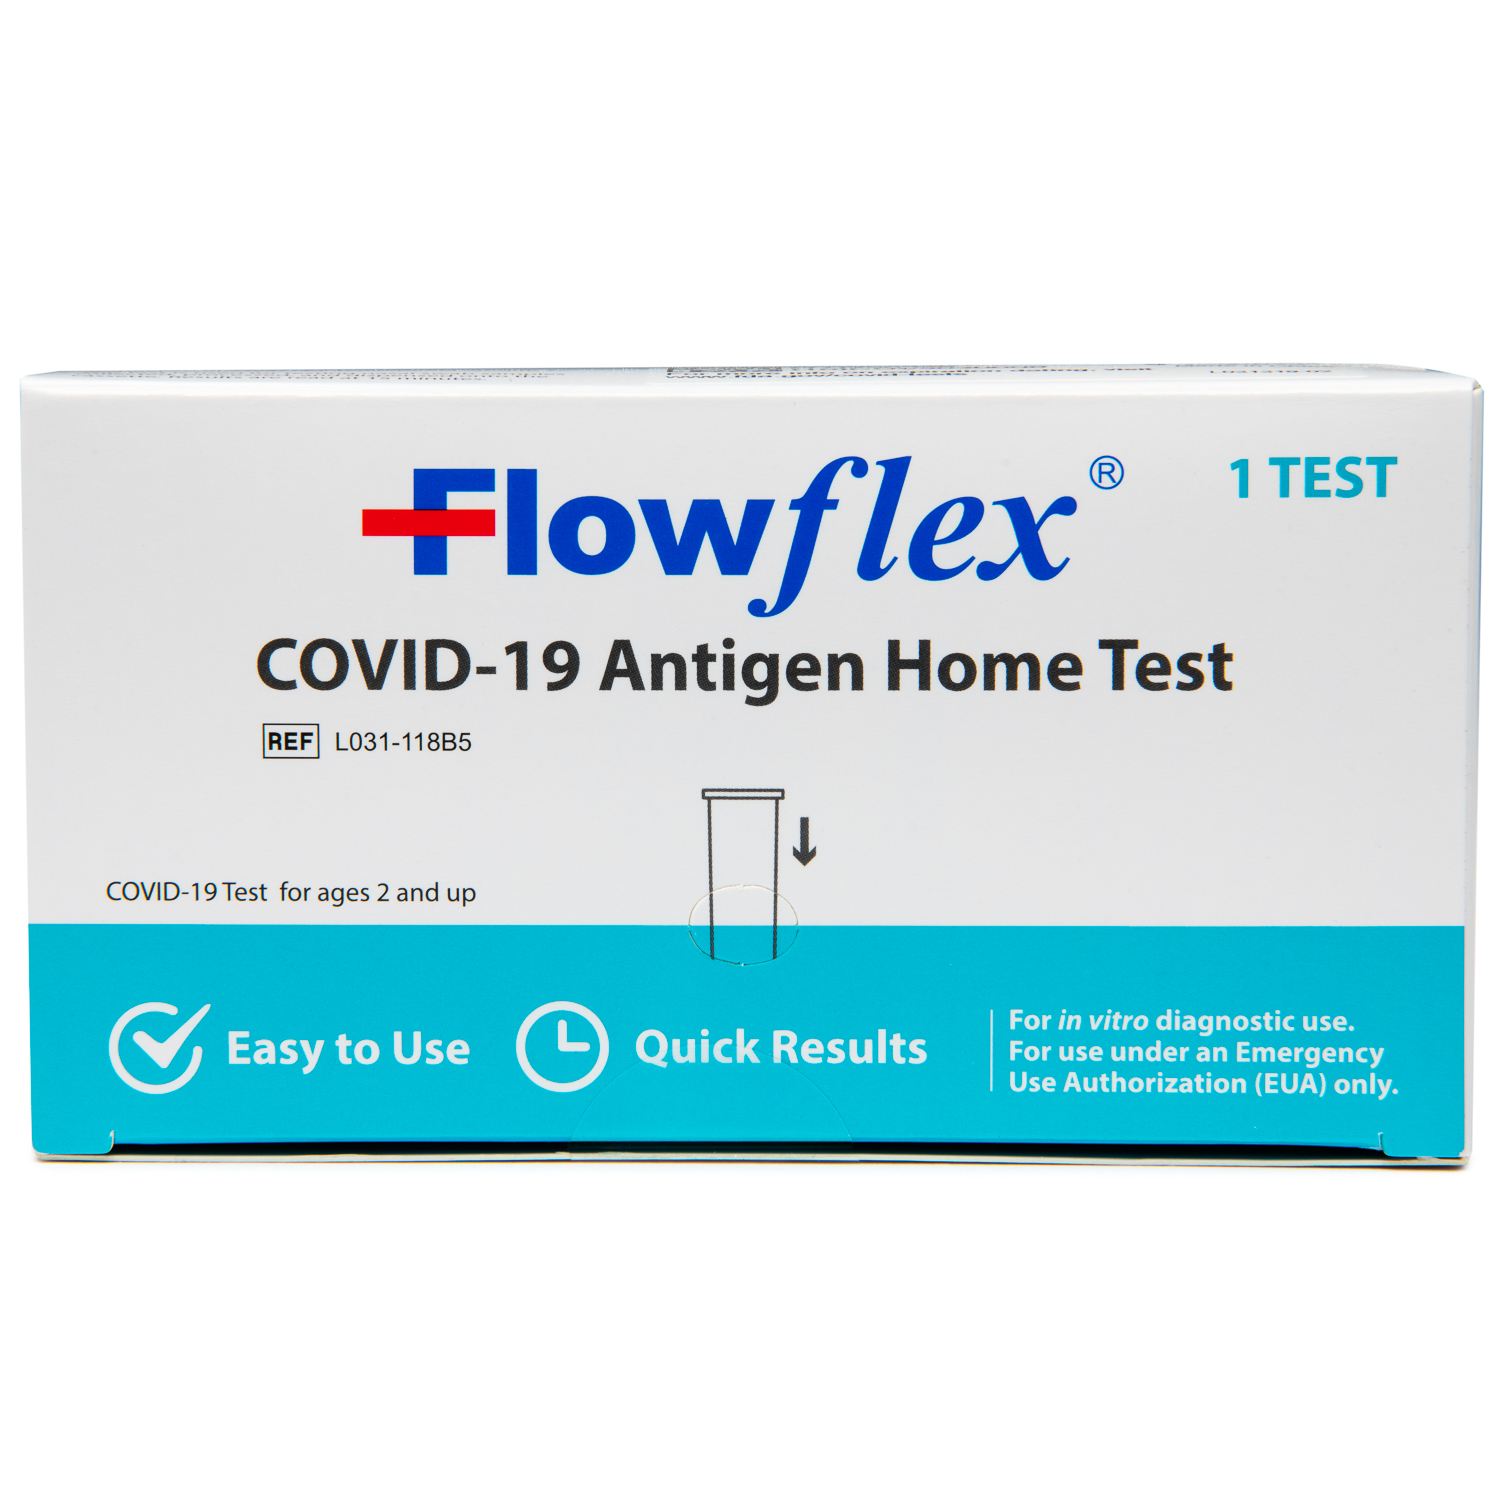 Covid: nasal self-test kit, how to use it properly